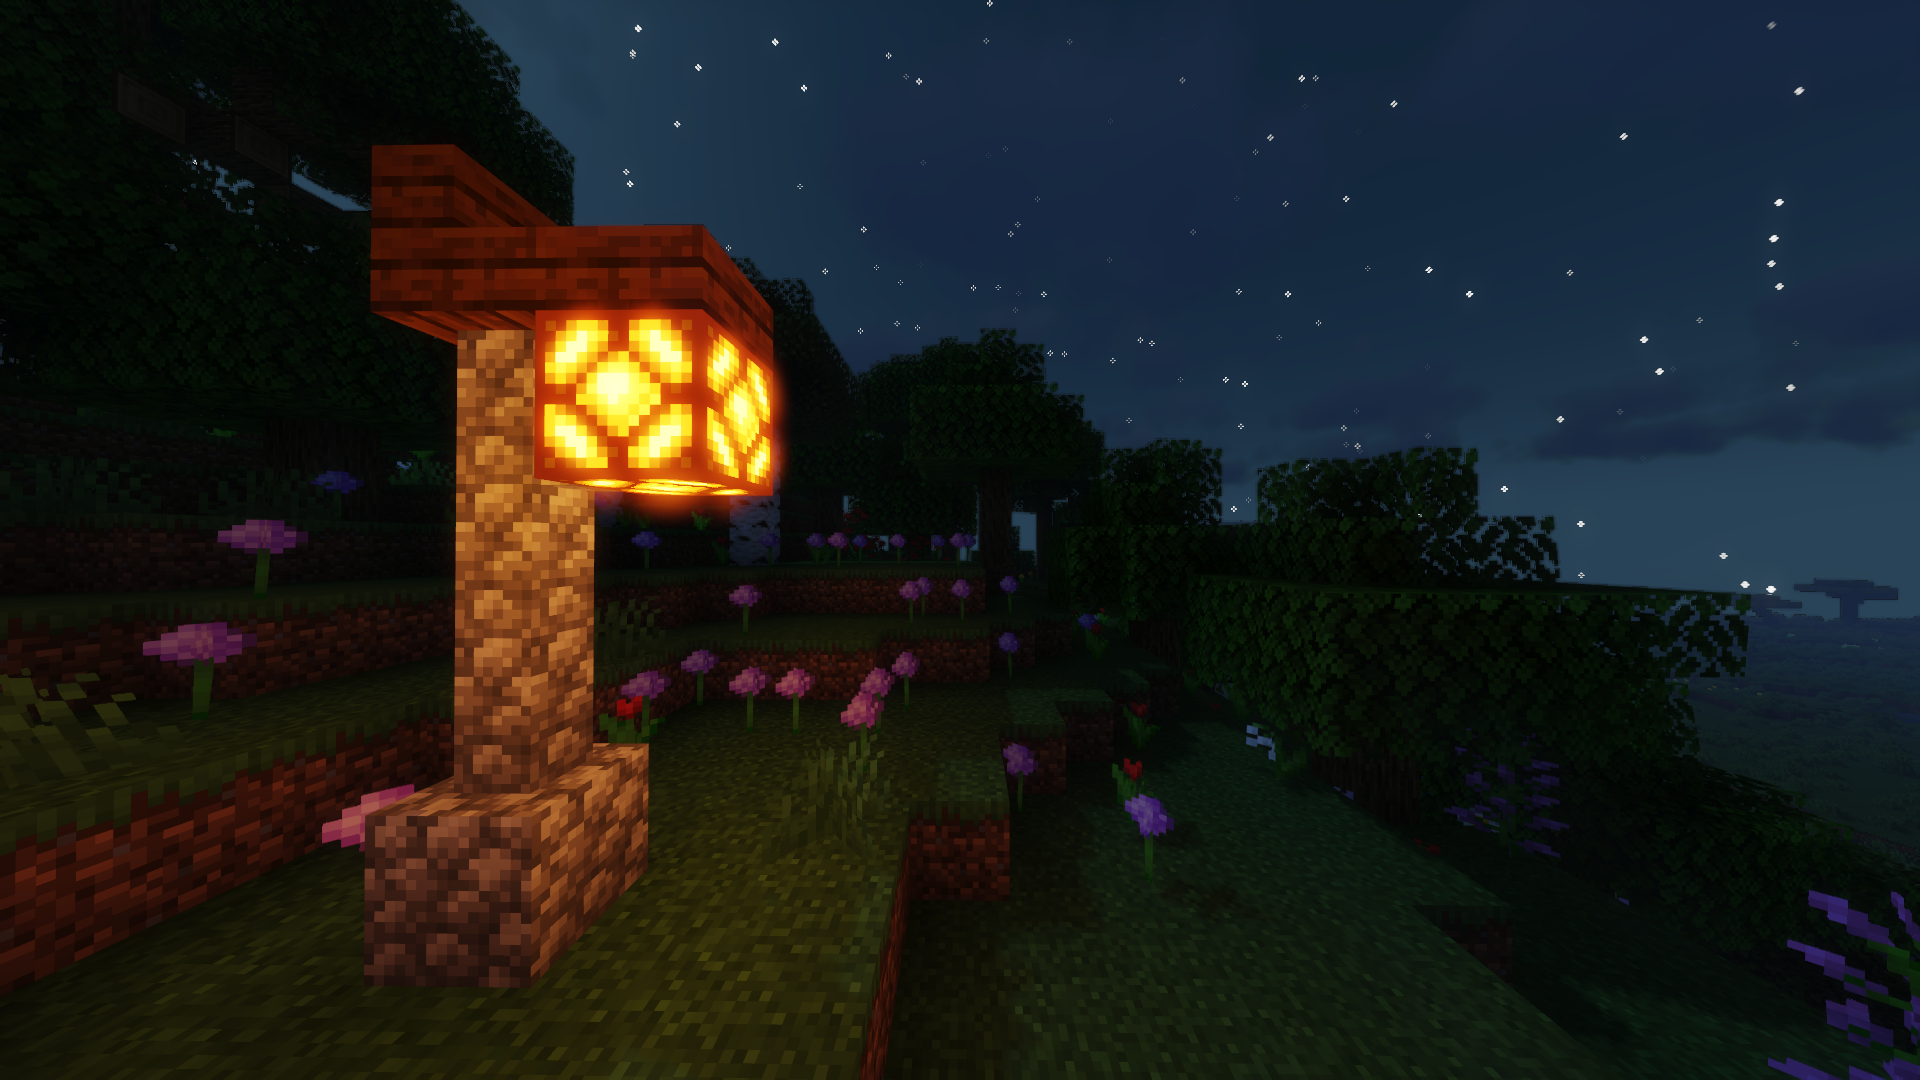 Streetlamps Spigotmc High, How To Make Street Lamps In Minecraft